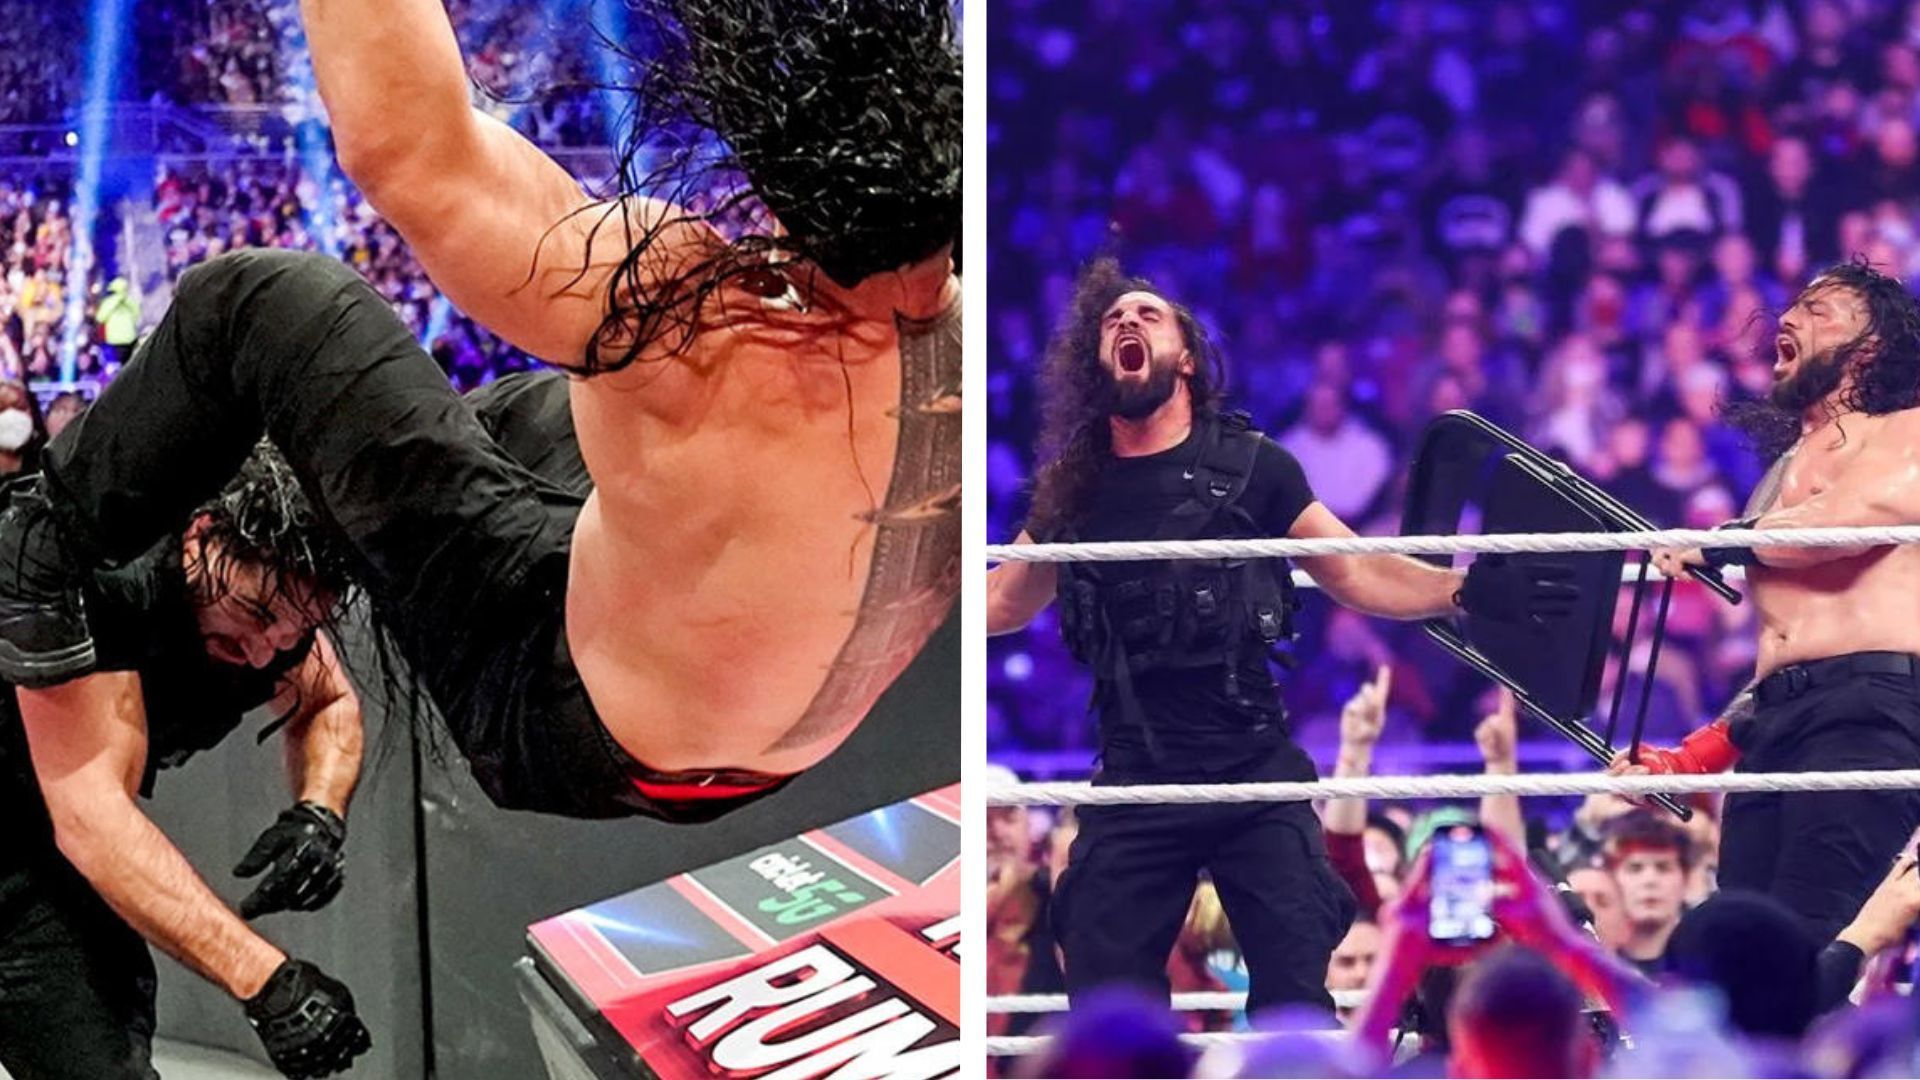 Roman Reigns and Seth Rollins had a vicious back-and-forth last year at Royal Rumble